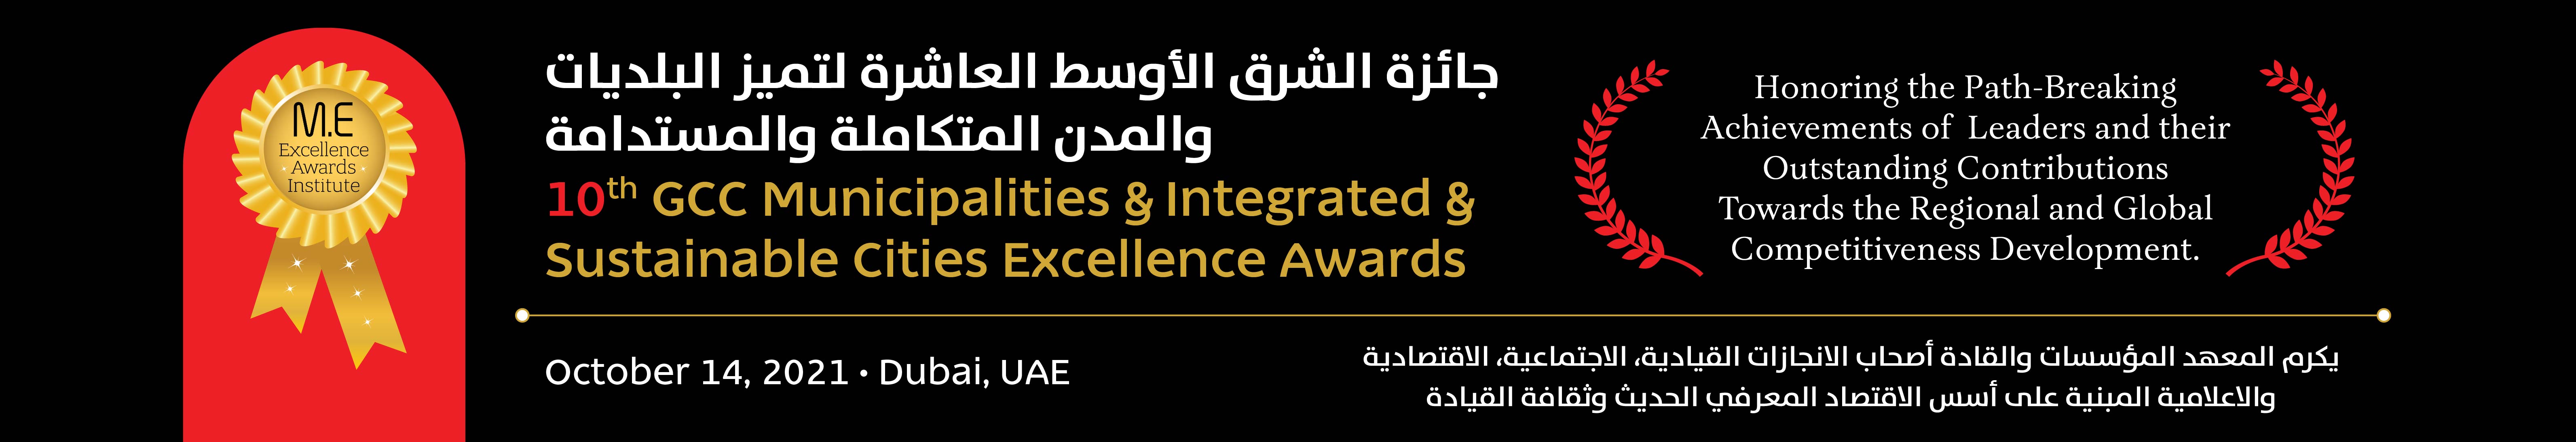 Middle East Excellence Awards Institute